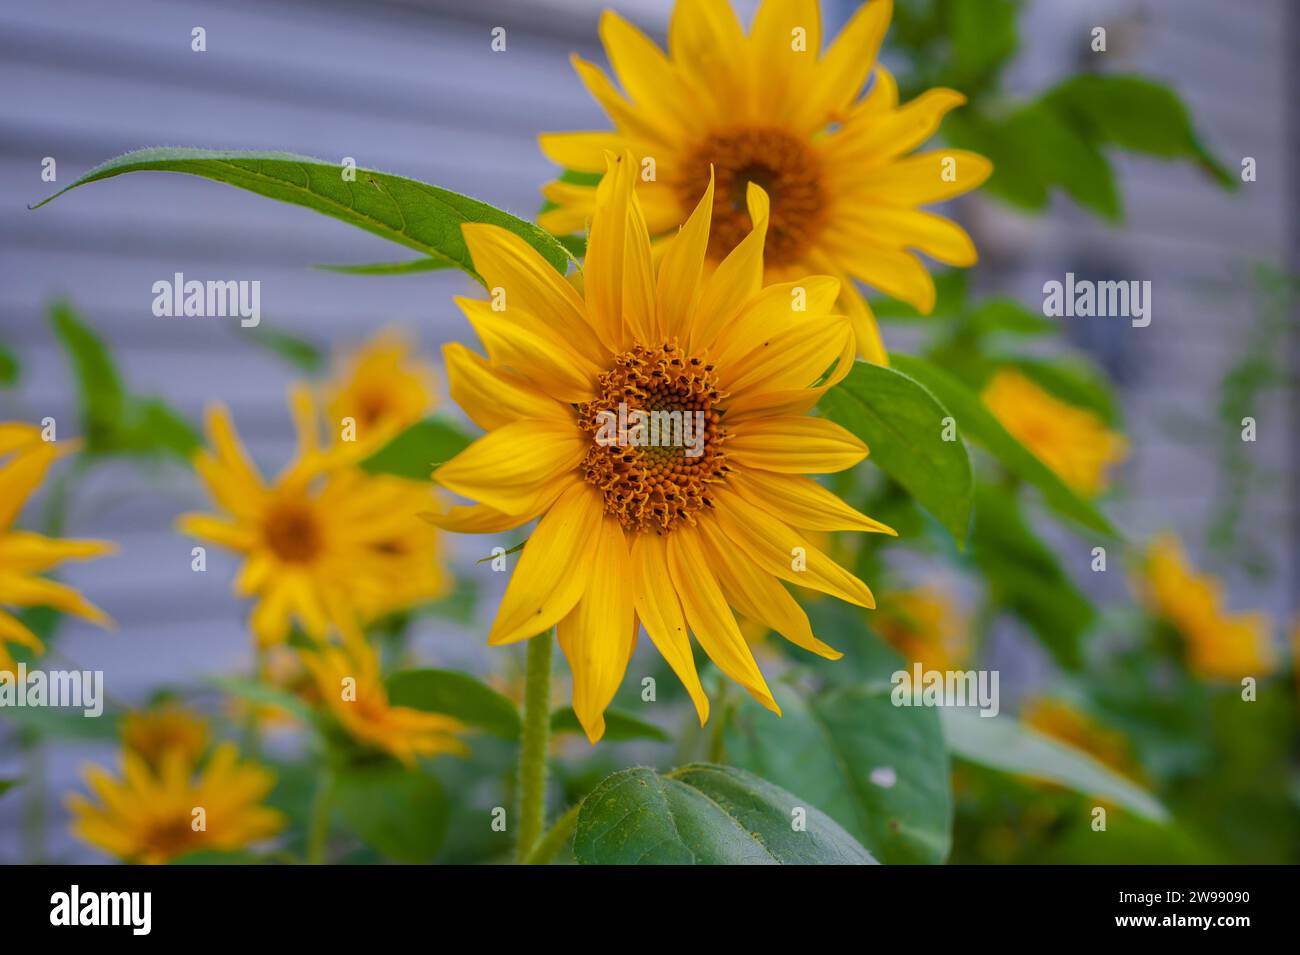 A closeup of vibrant yellow sunflowers blooming in a lush green garden, with a gray house in the background Stock Photo